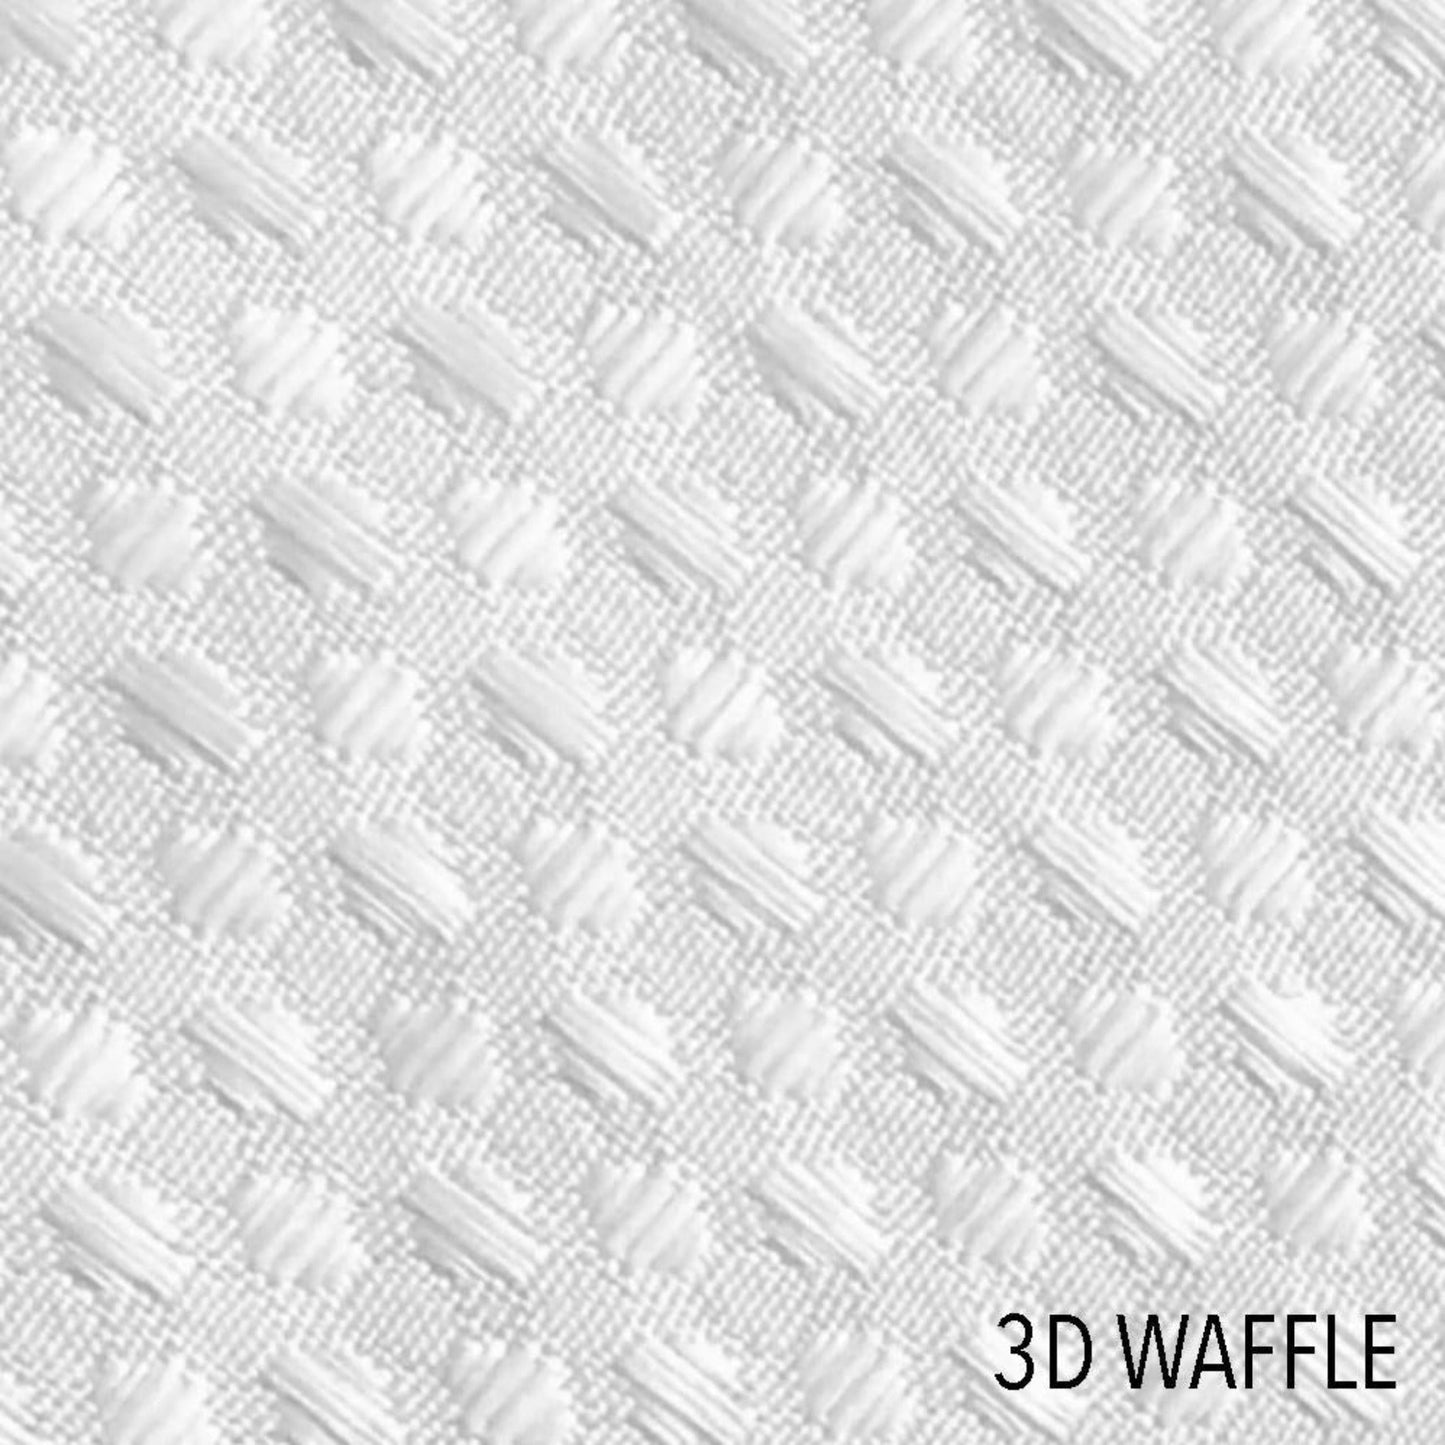 "Stylish and Comfortable Waffle Weave Decorative Top Sheet for a Cozy Night's Sleep"